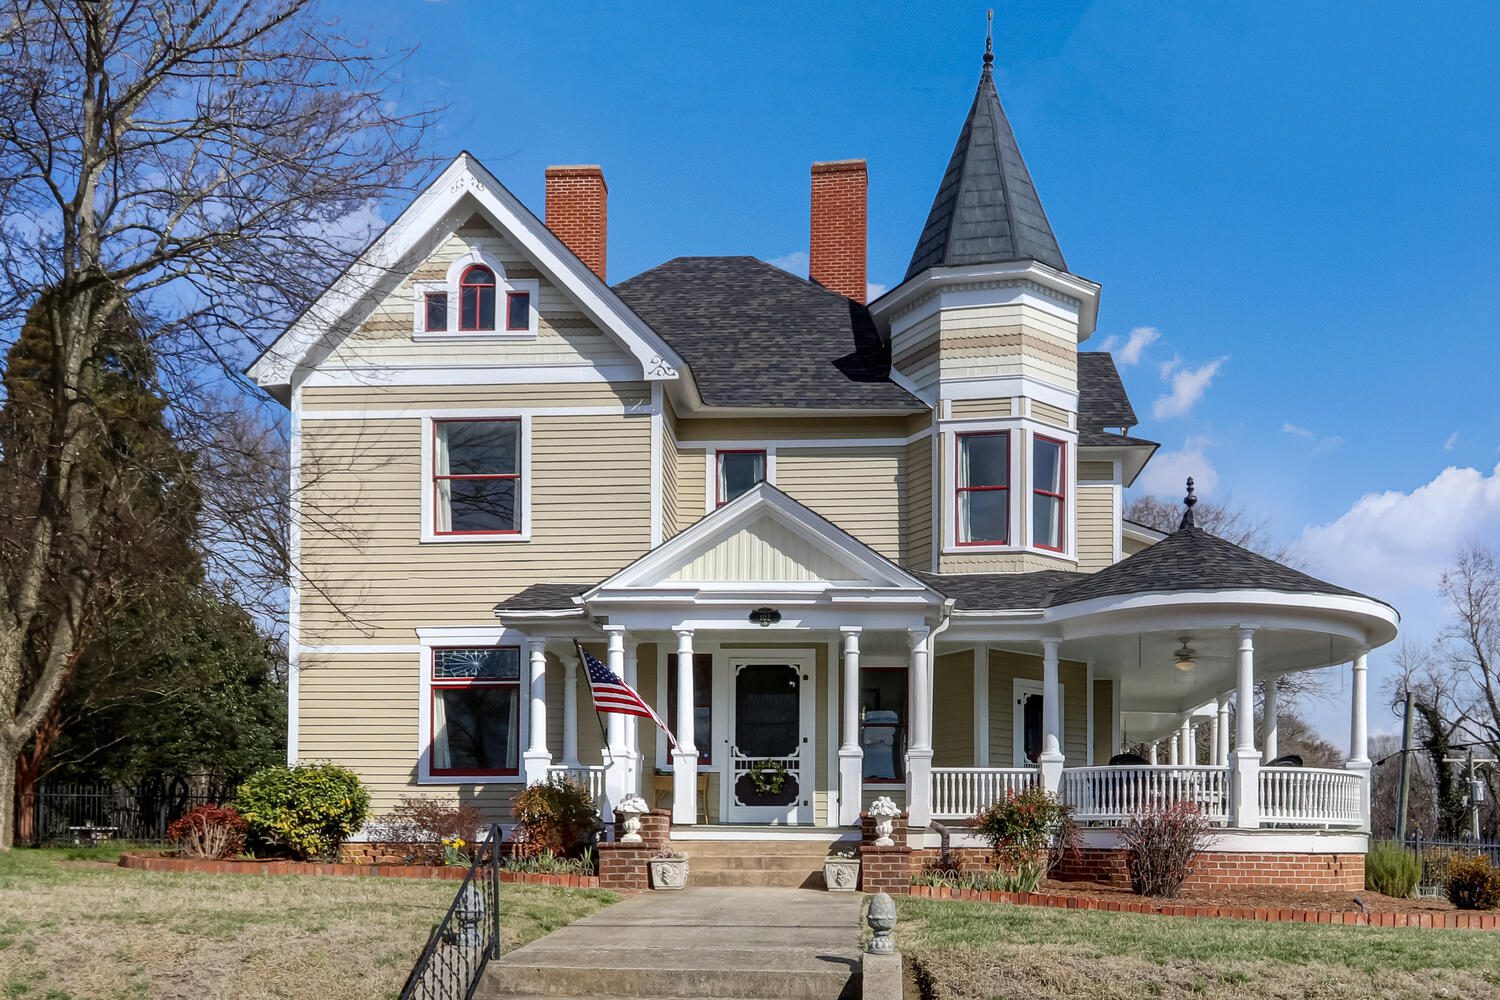 Is a historic home the right fit for you?